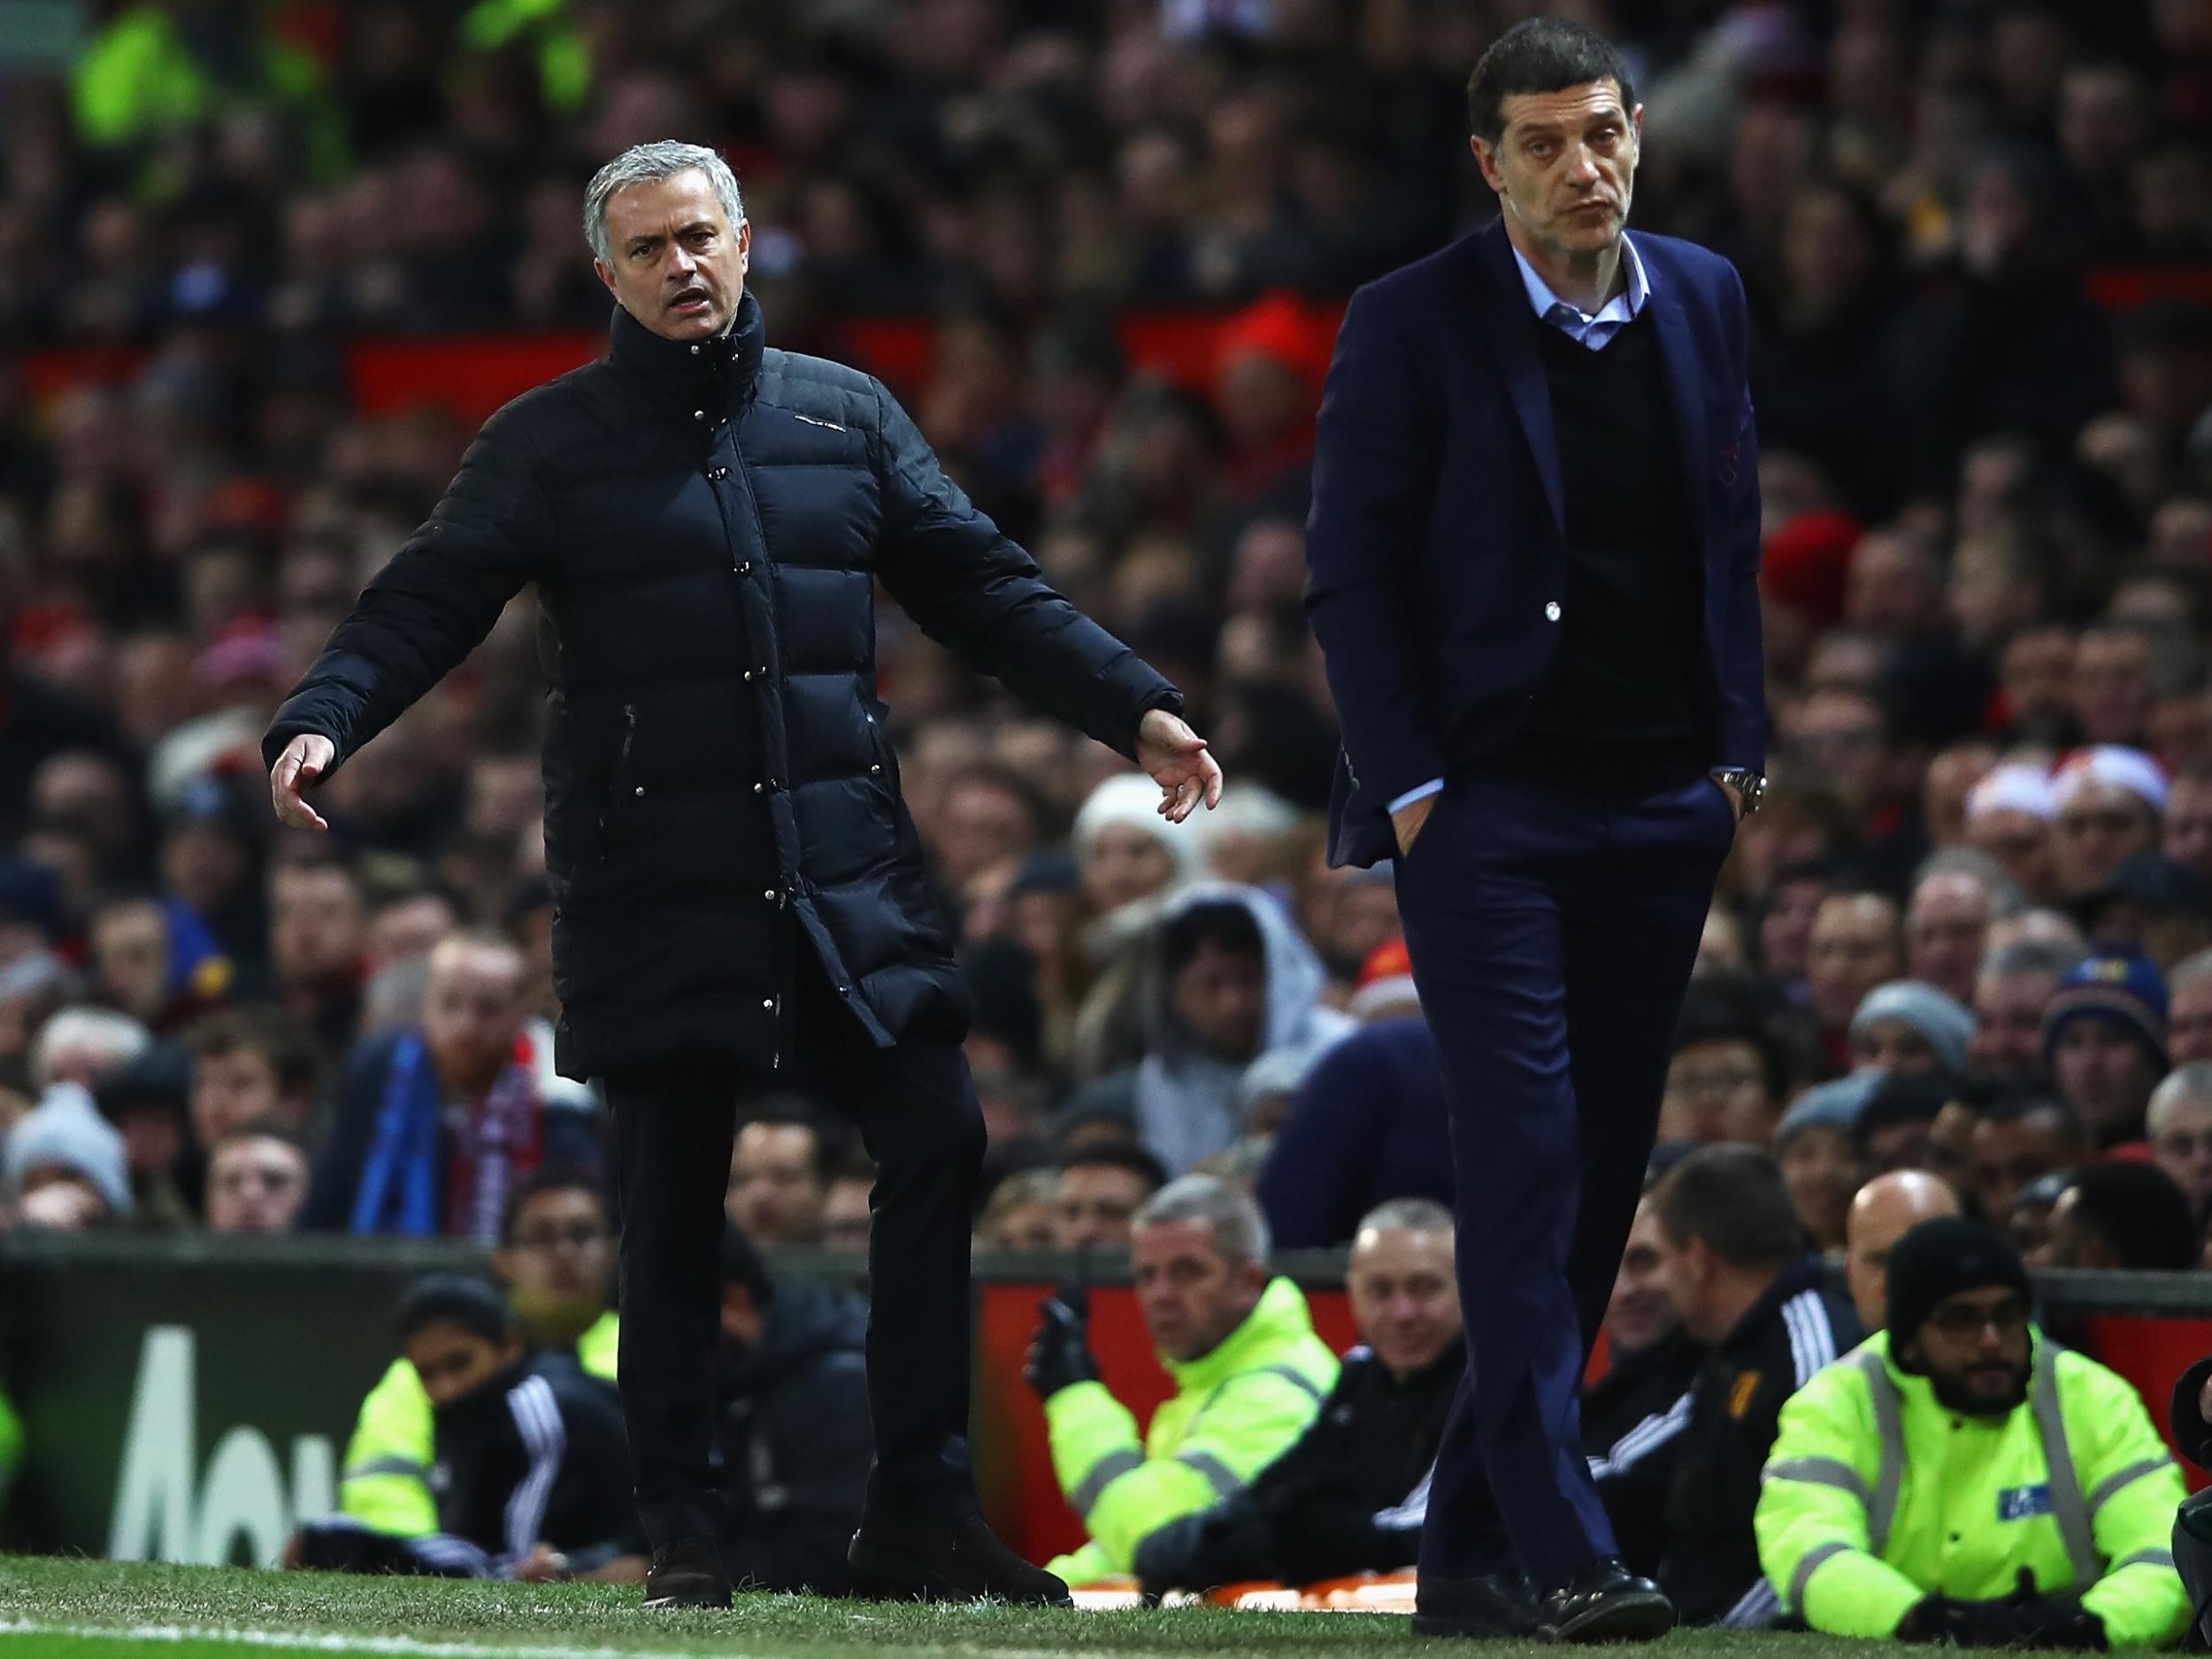 Mourinho was removed for kicking a water bottle on the touchline